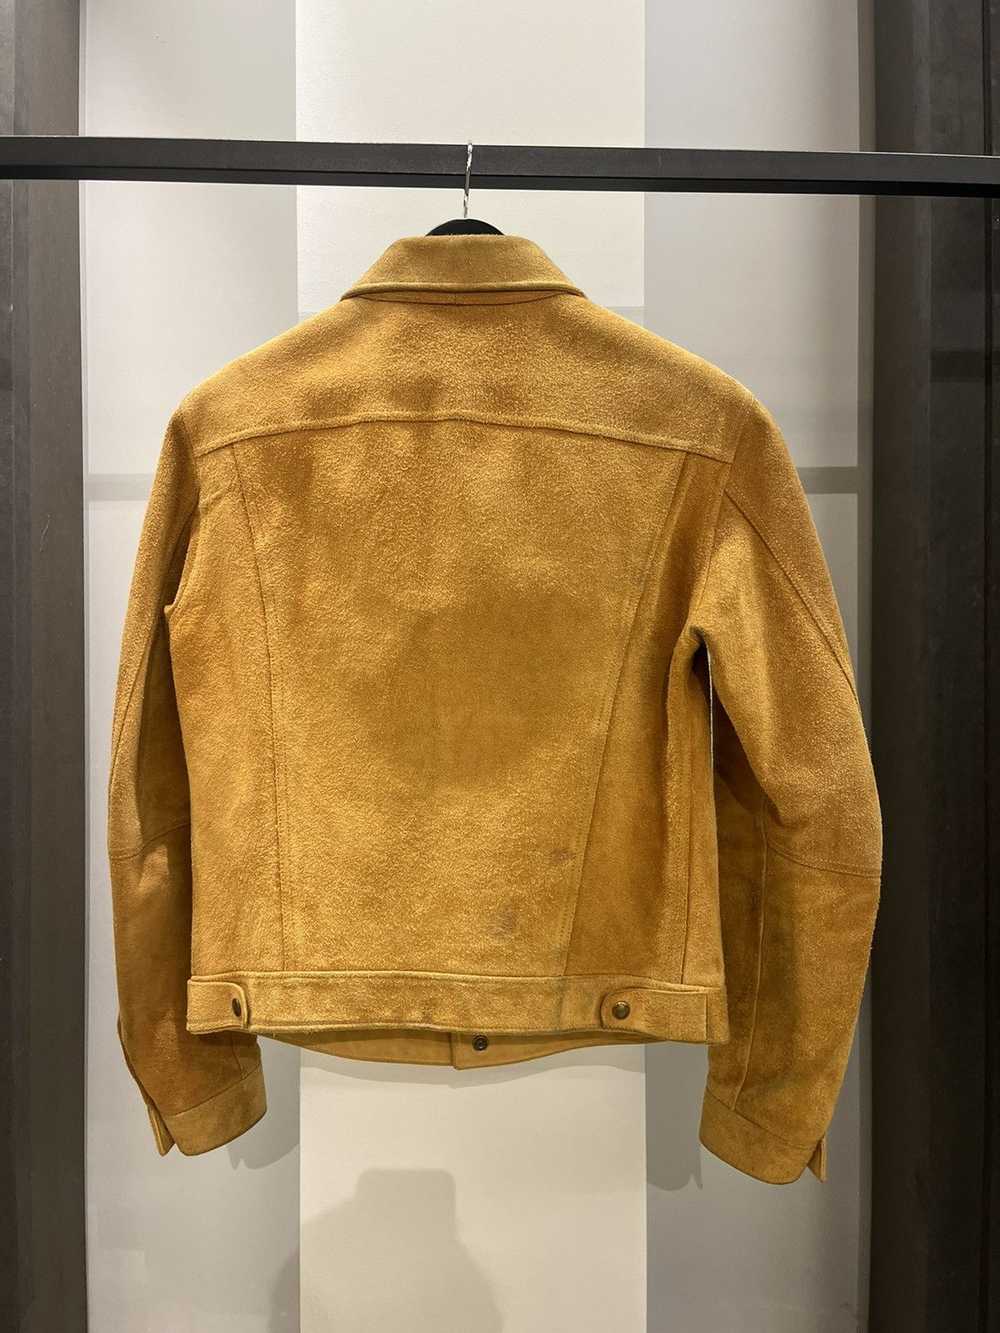 Tom Ford Tom Ford Suede Leather Jacket - image 2